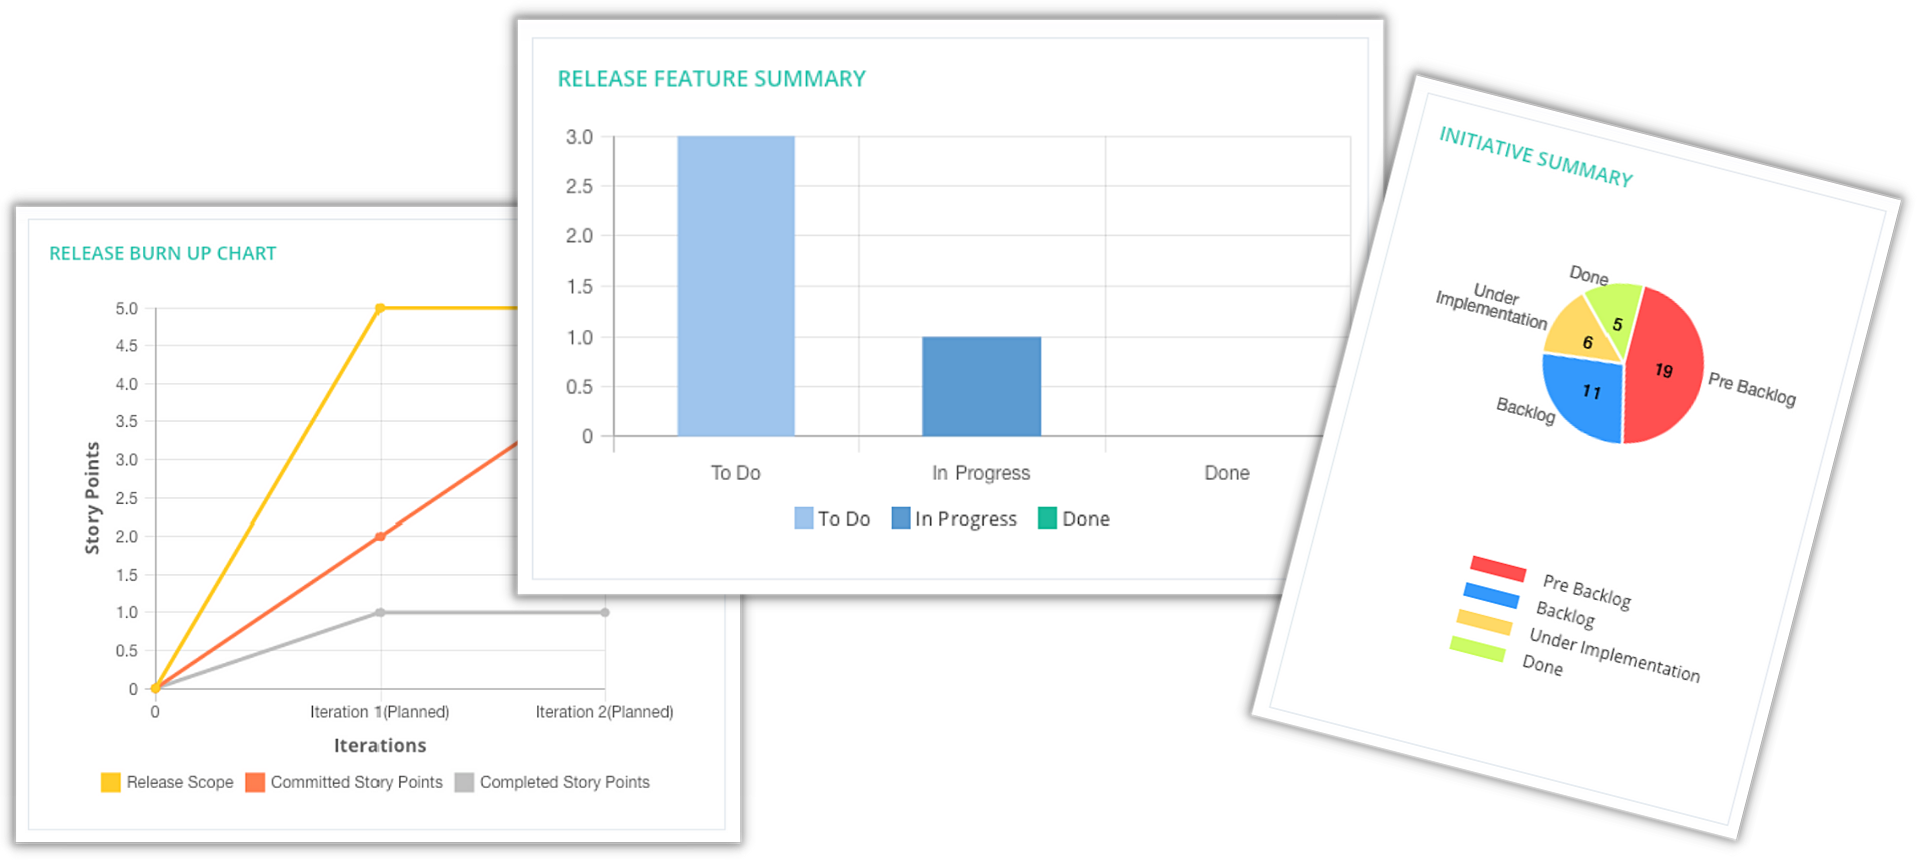 Release burn up chart | Release feature summary | Initiative summary